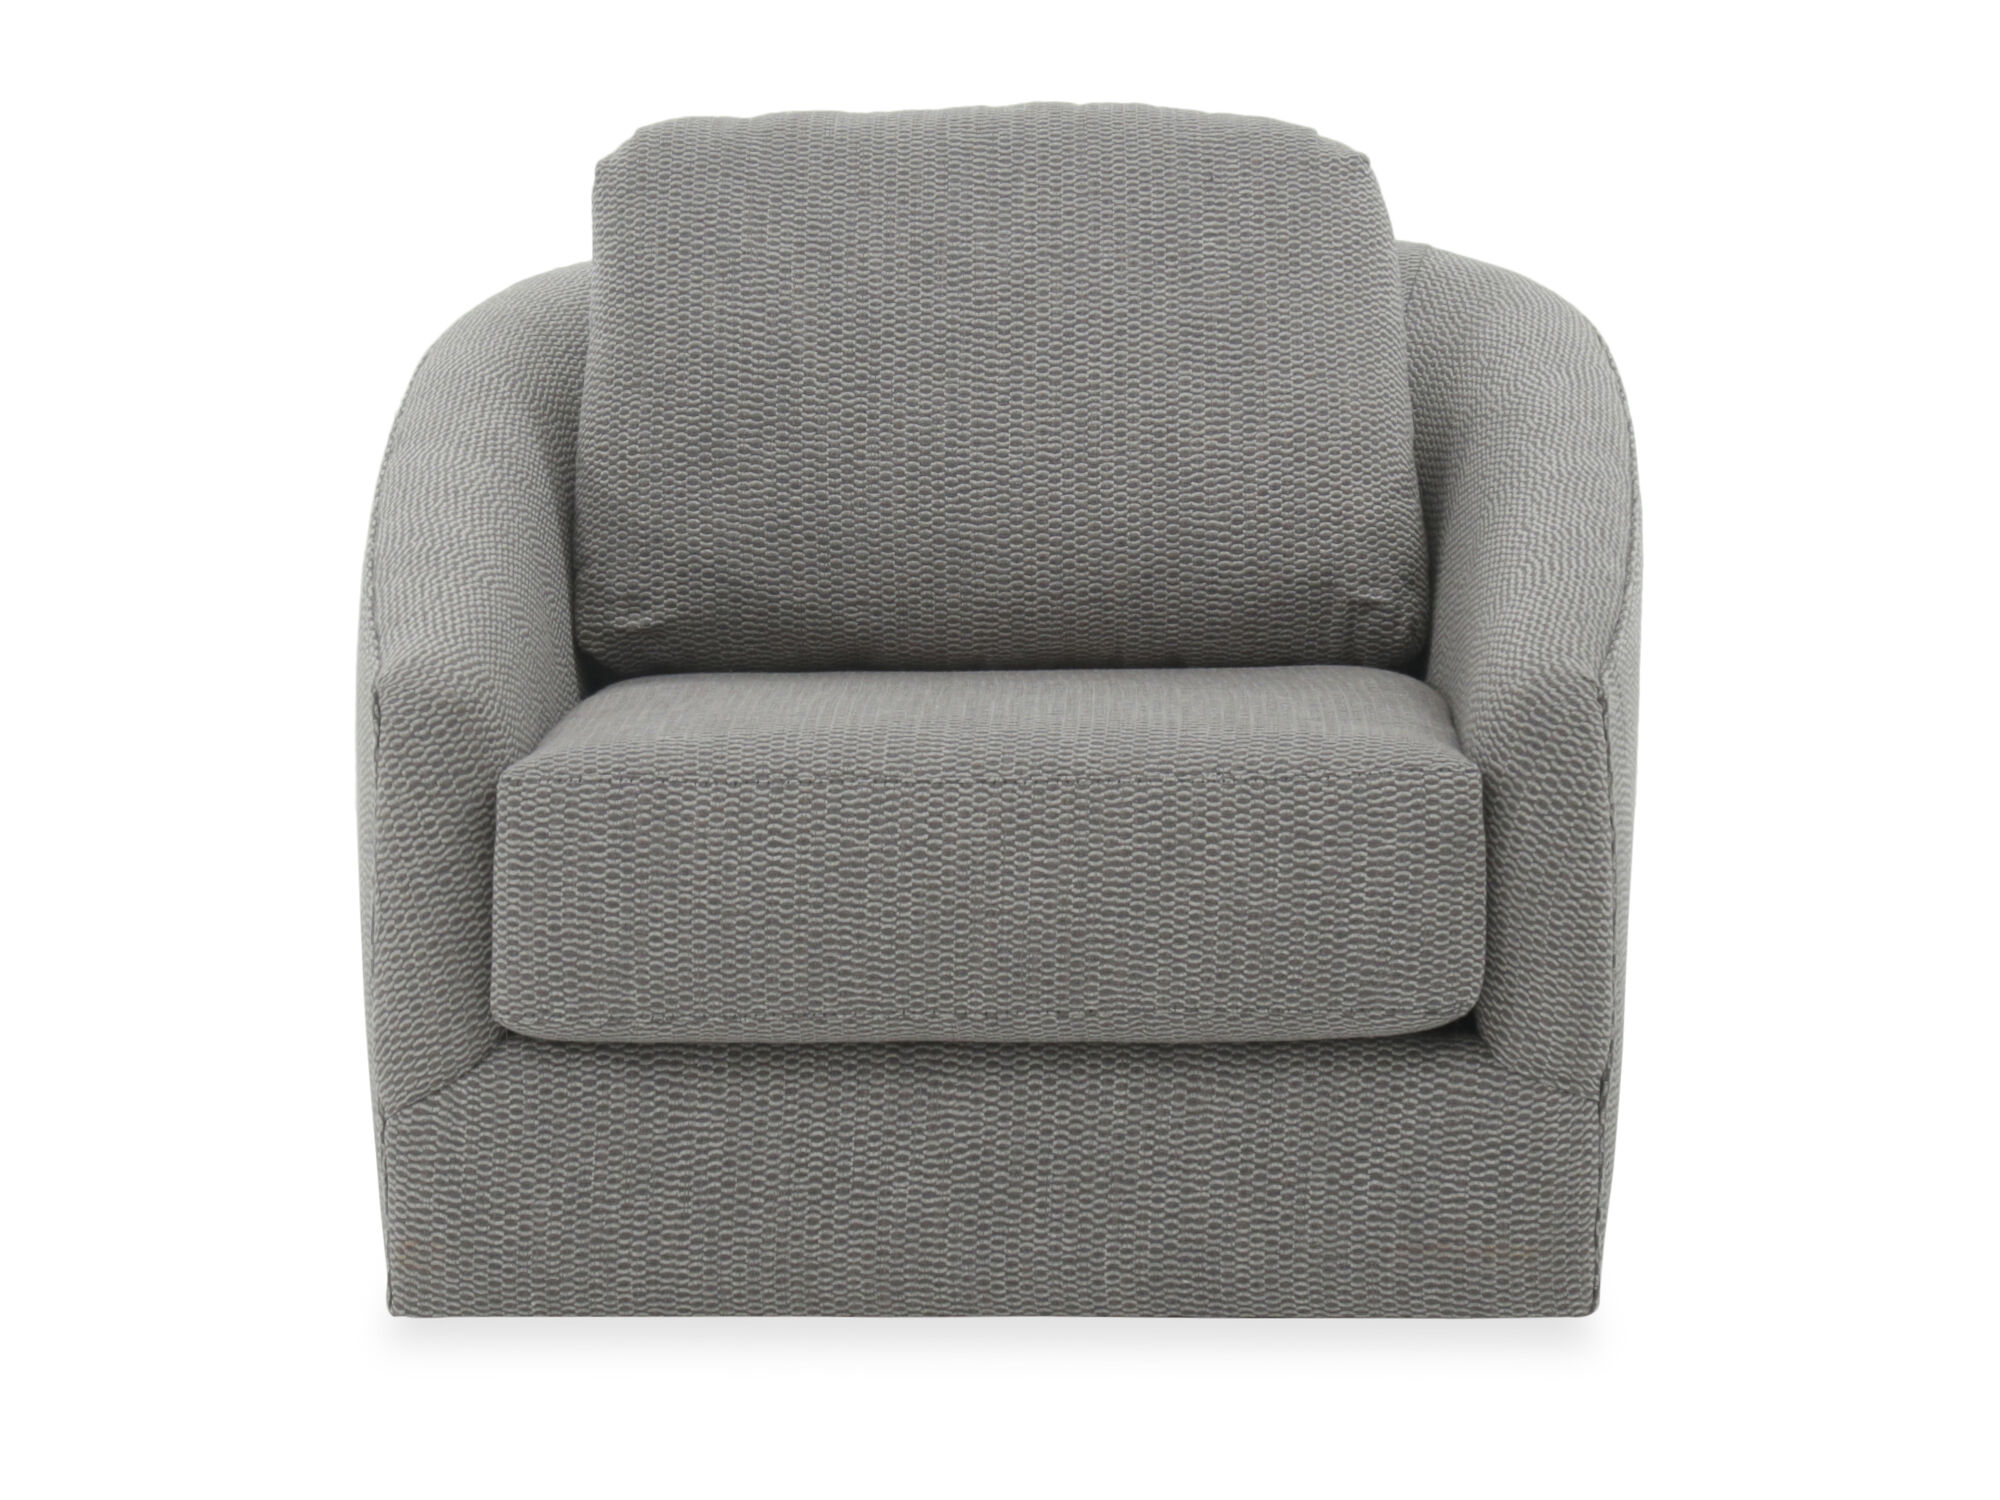 Textured Contemporary Swivel Chair in Gray Mathis